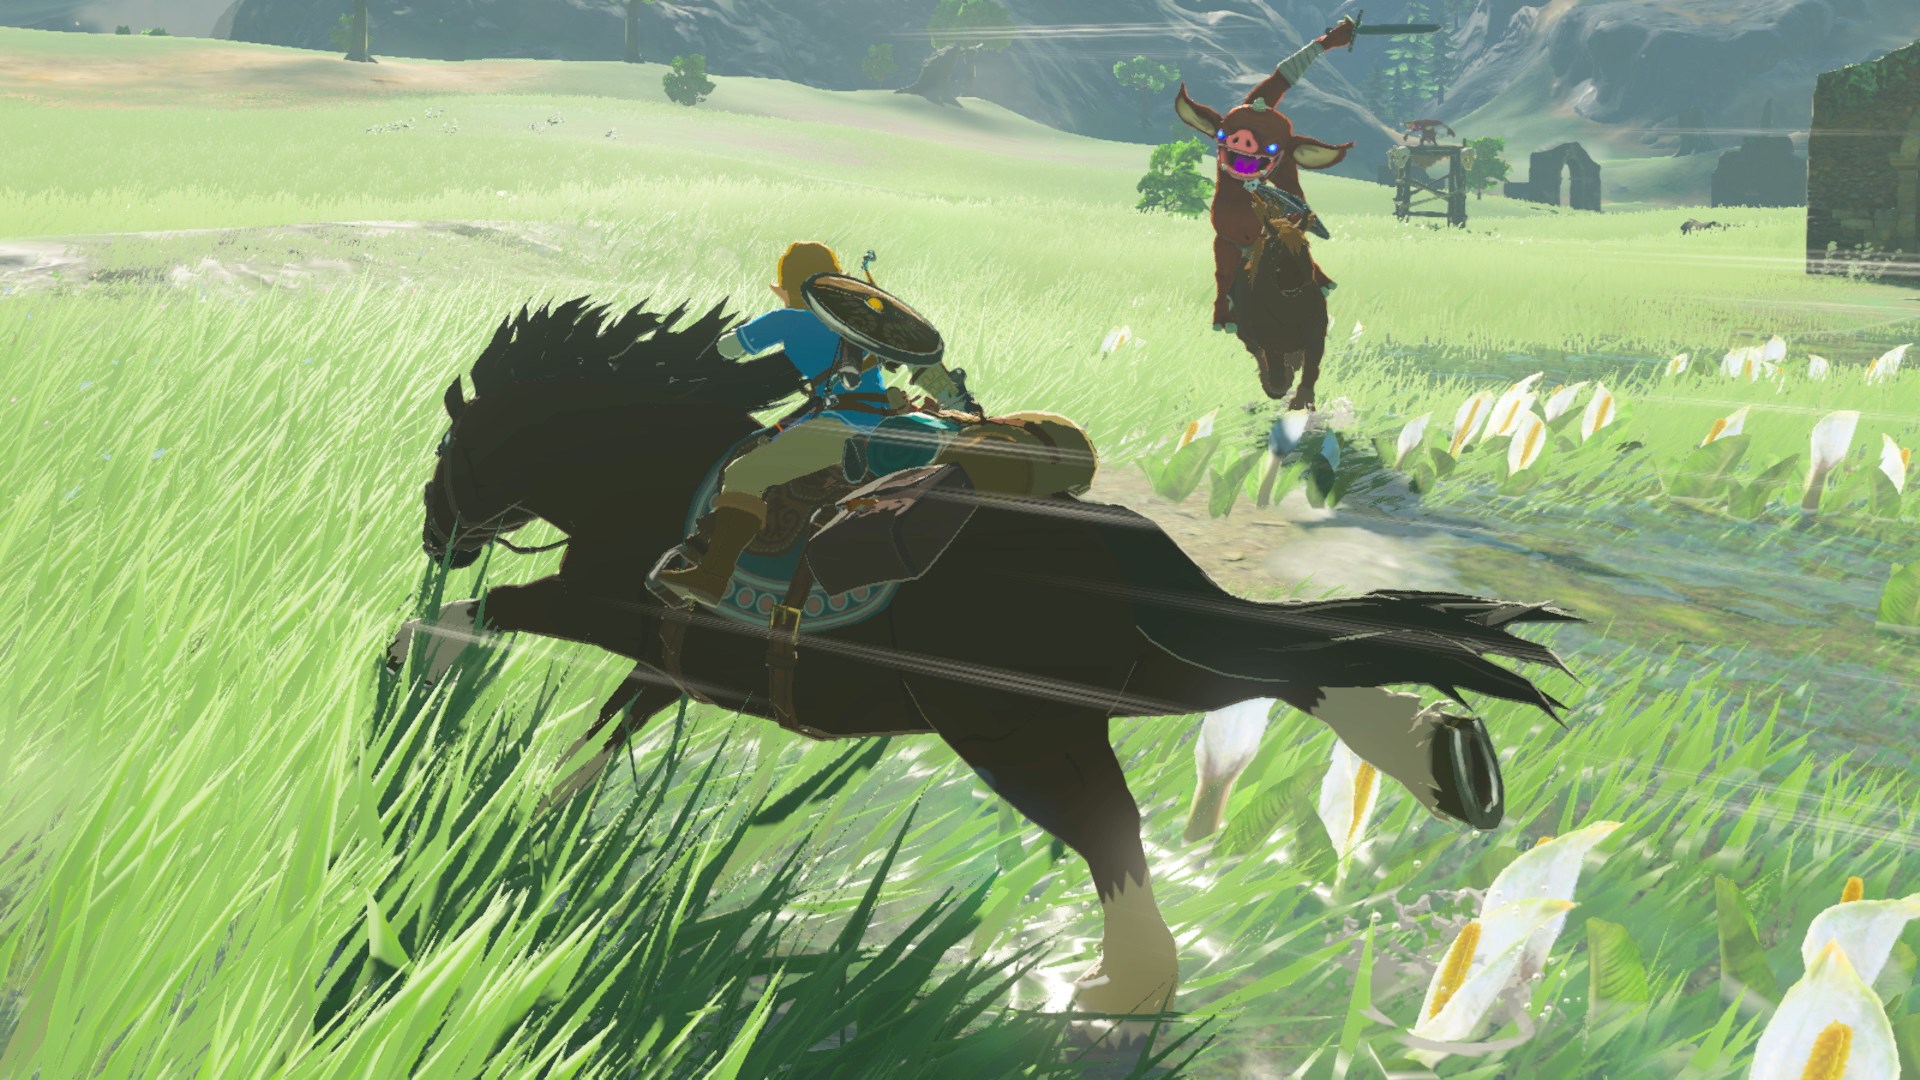 Link riding a horse in The Legend of Zelda: Breath of the Wild.